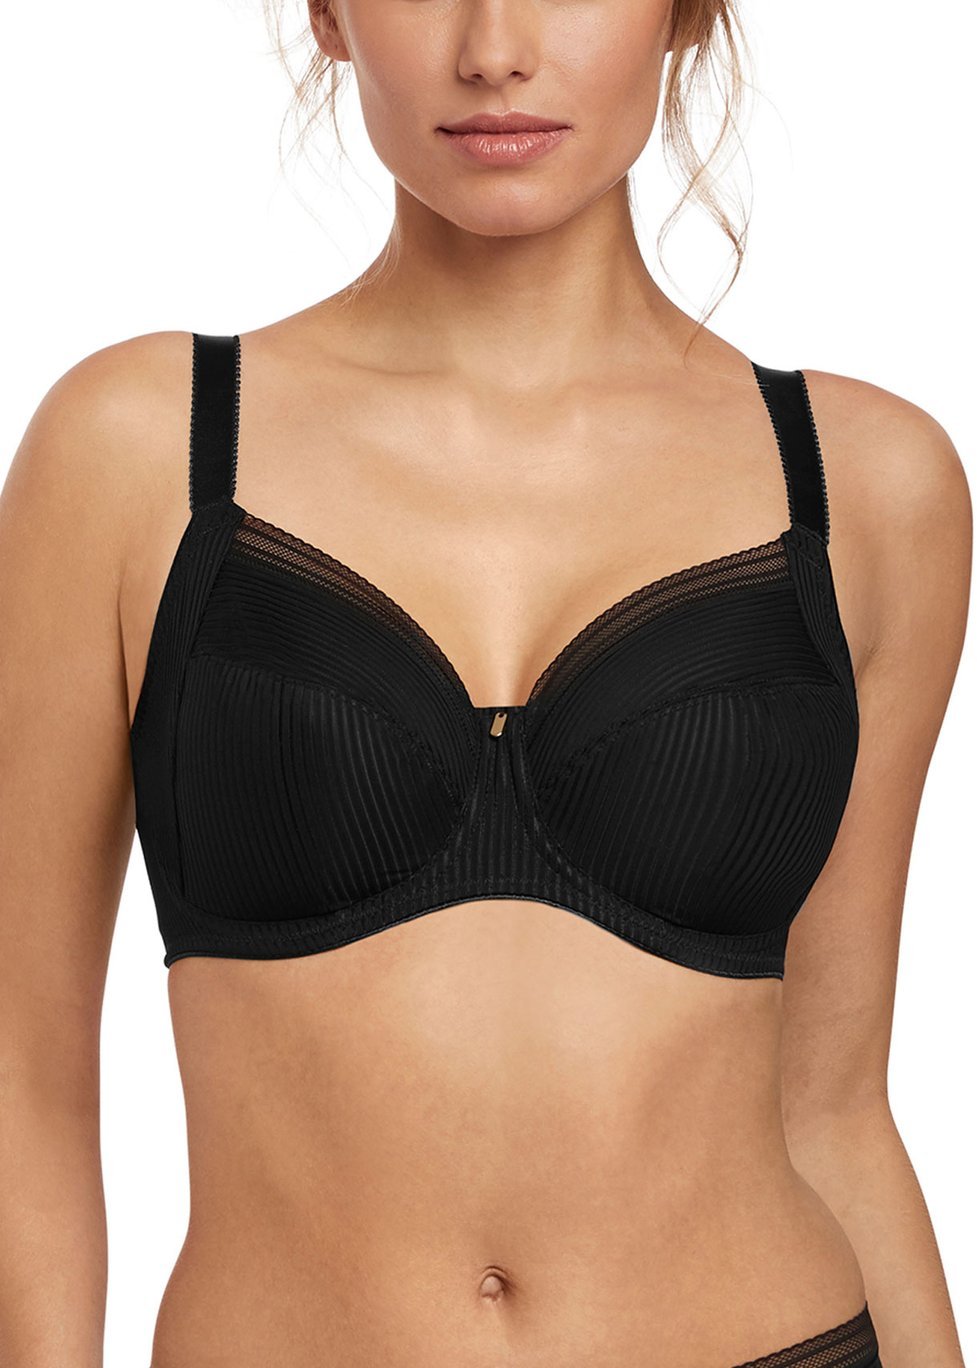 Fantasie Fusion Underwired Full Cup Side Support Bra - Blackberry